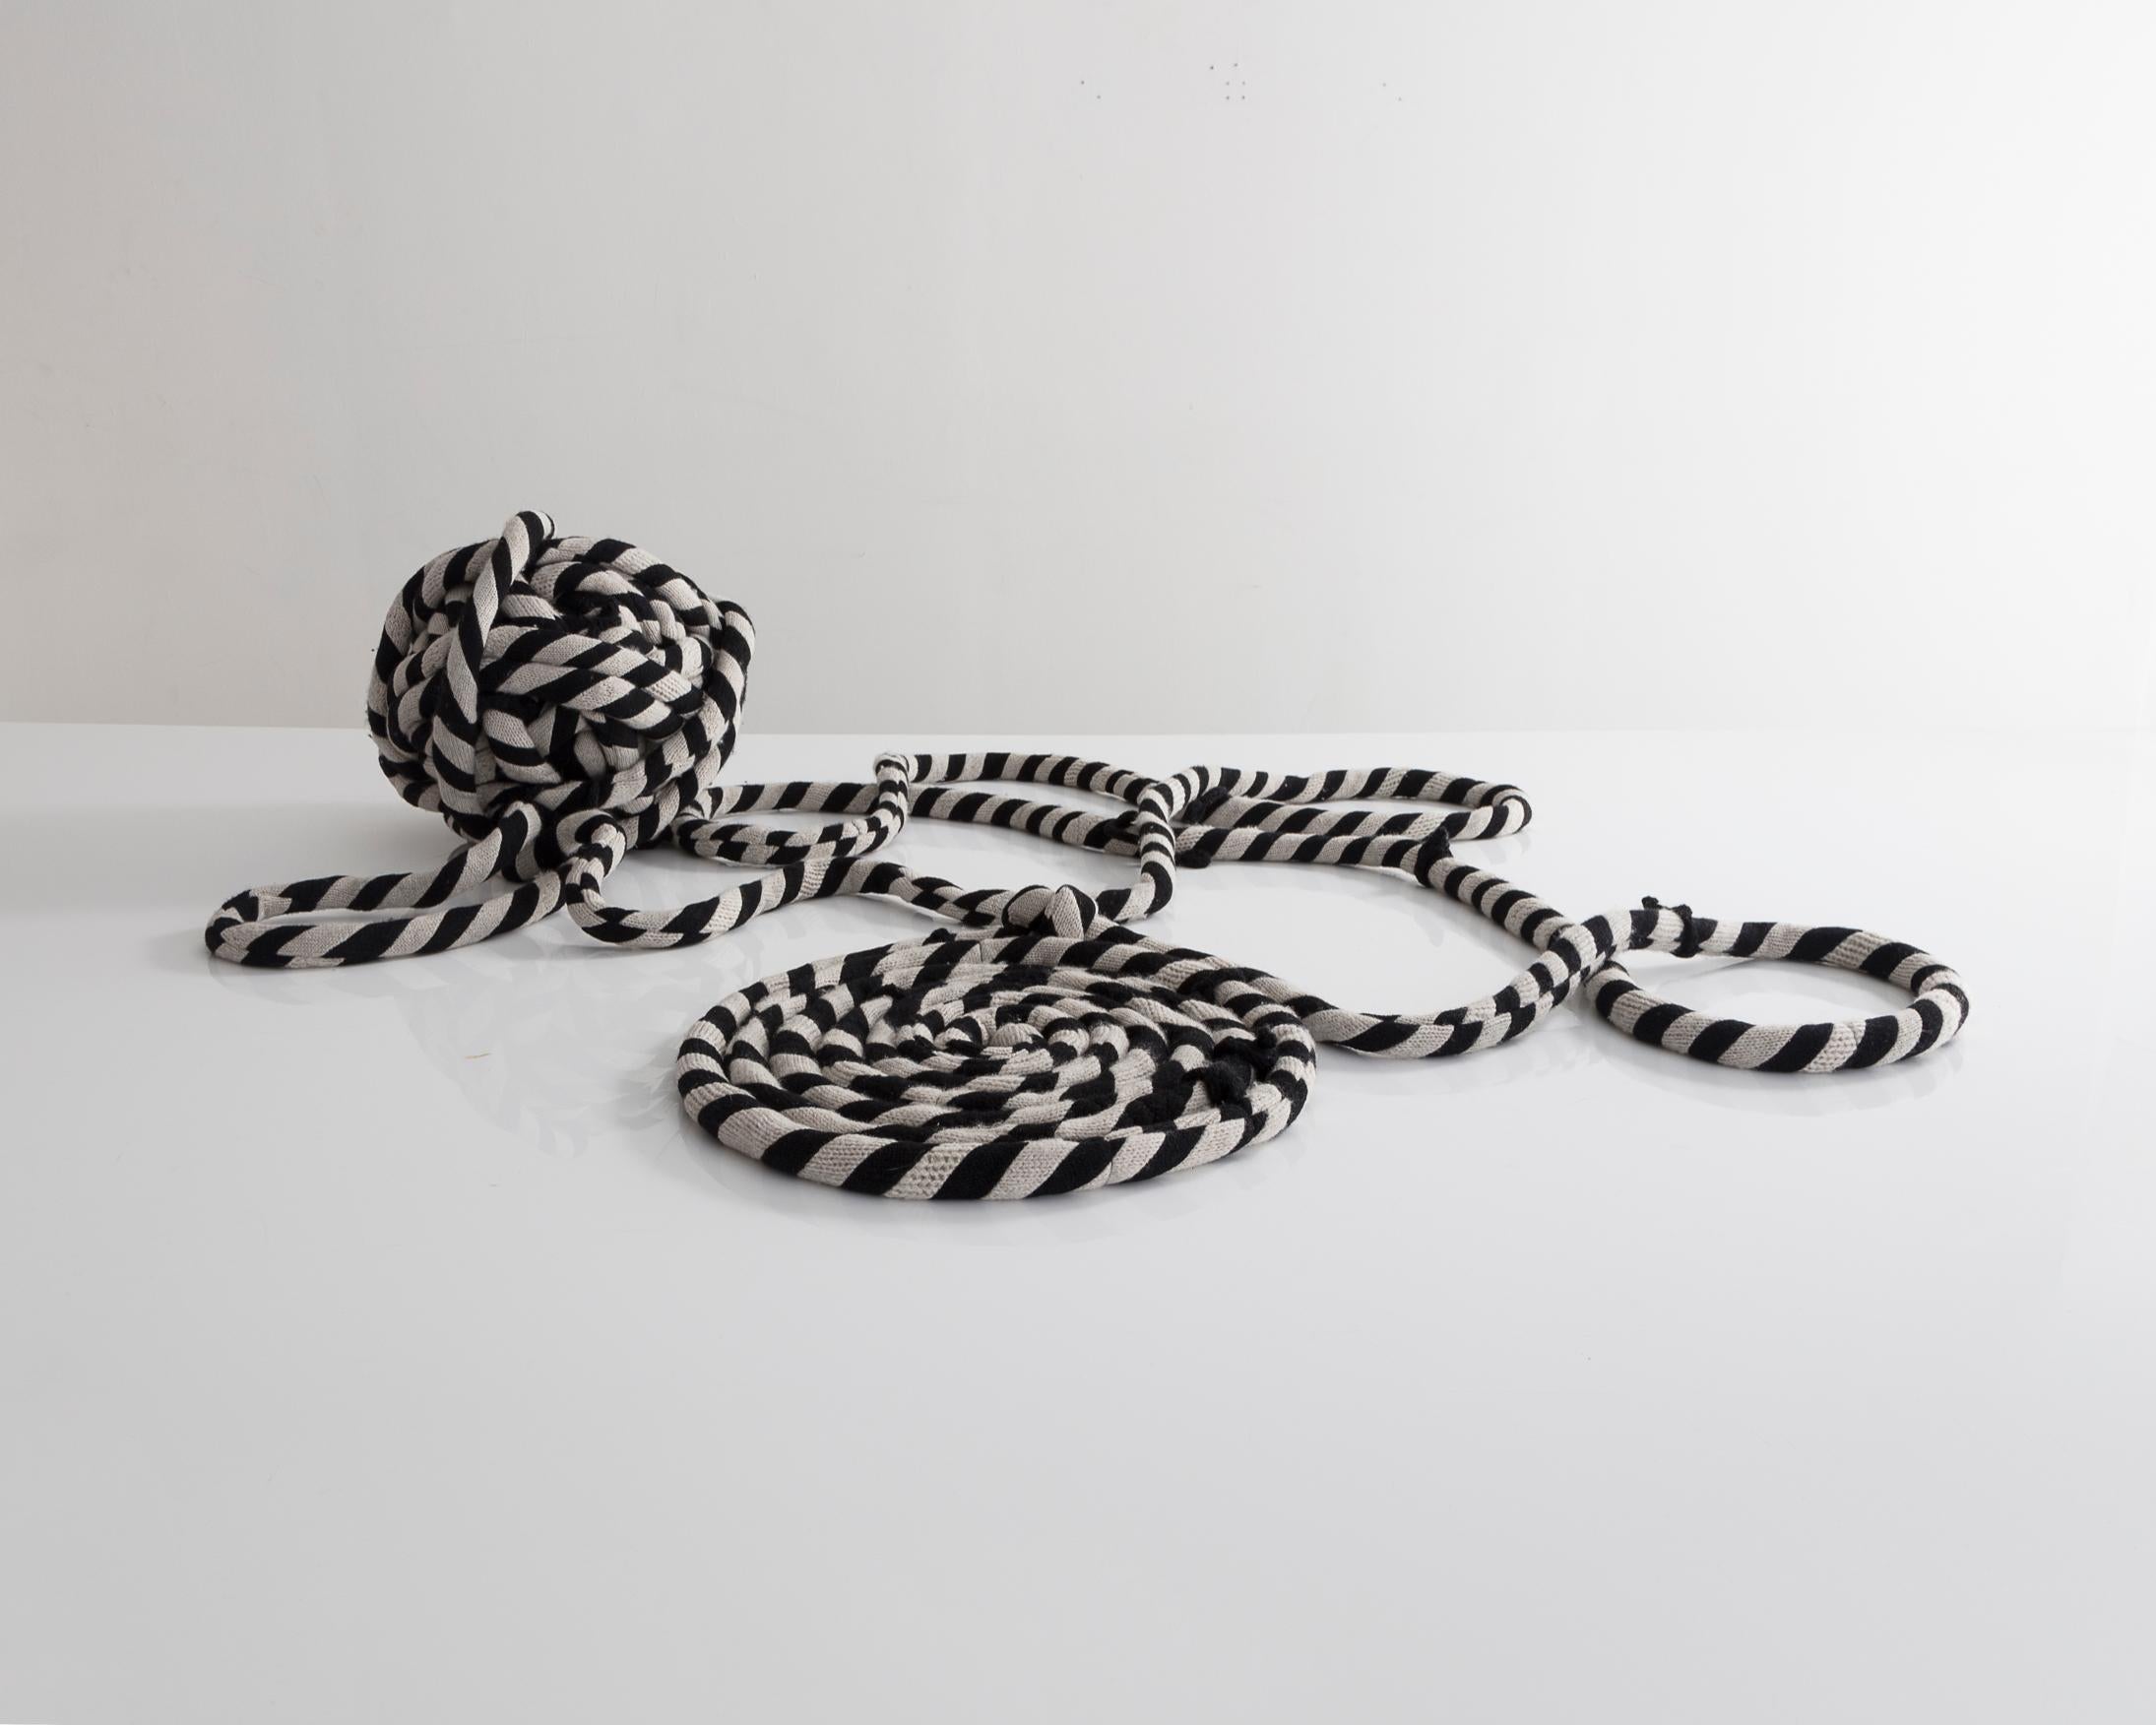 Unique coil sculpture in black and white cashmere. Designed and made by Greg Chait, USA, 2016.
  